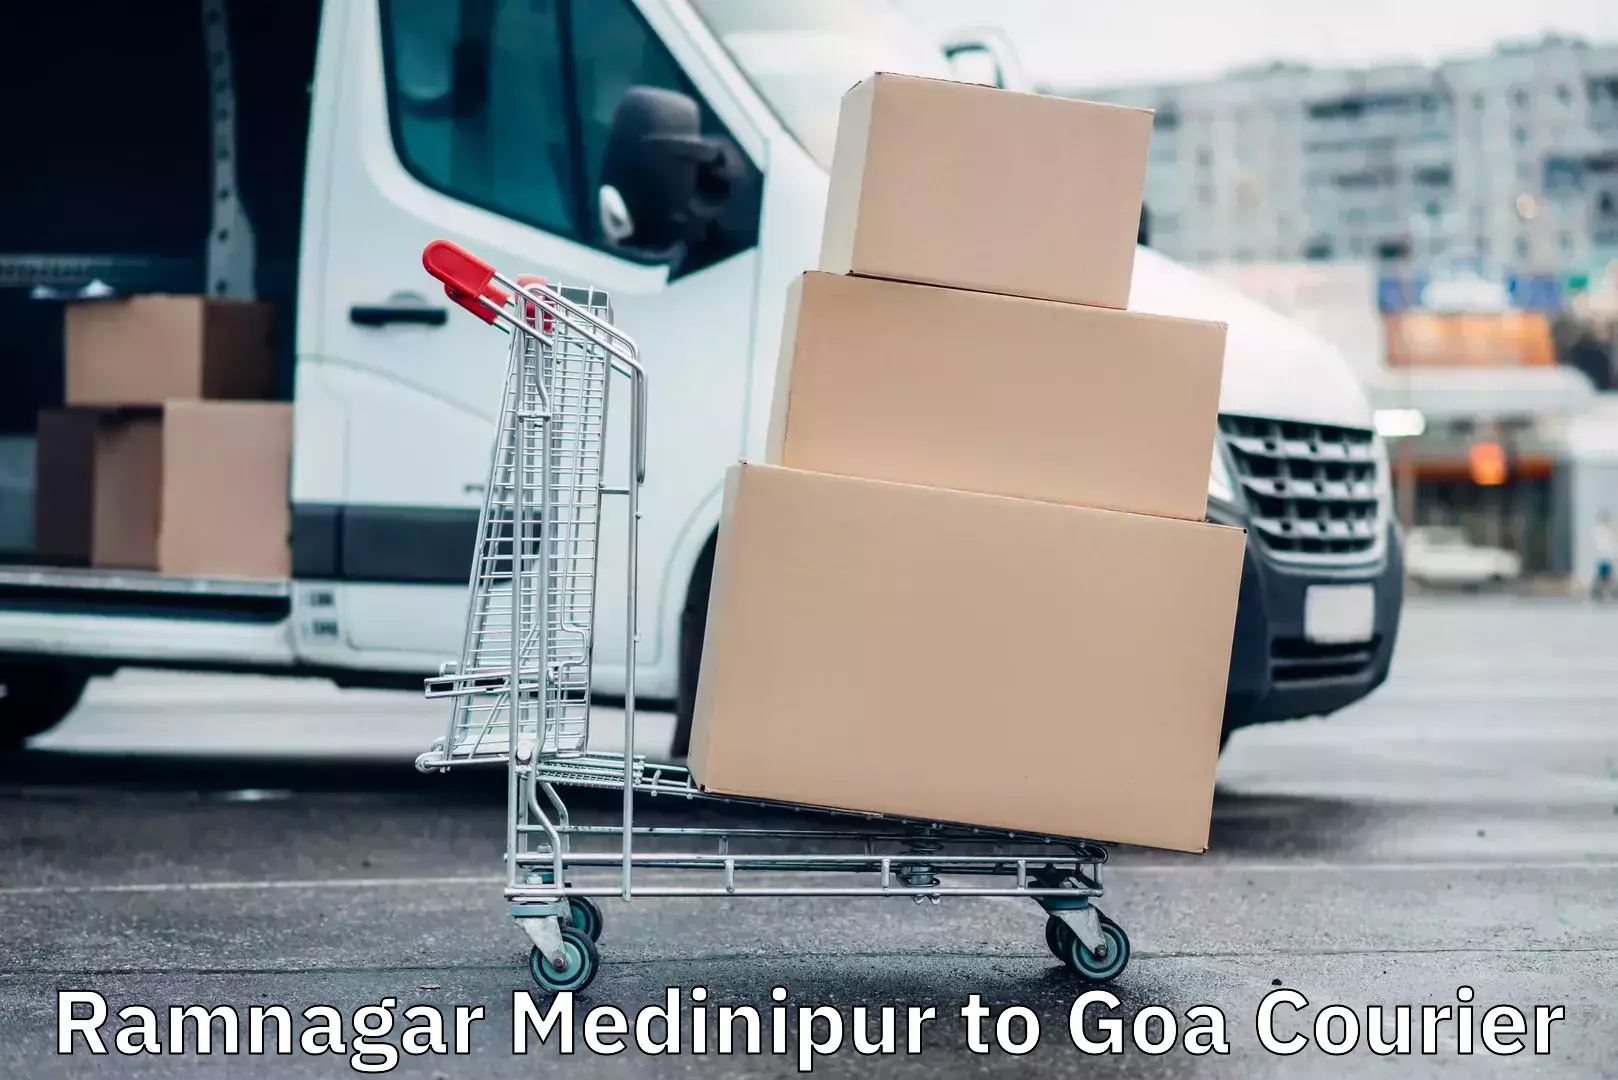 High-quality delivery services Ramnagar Medinipur to Goa